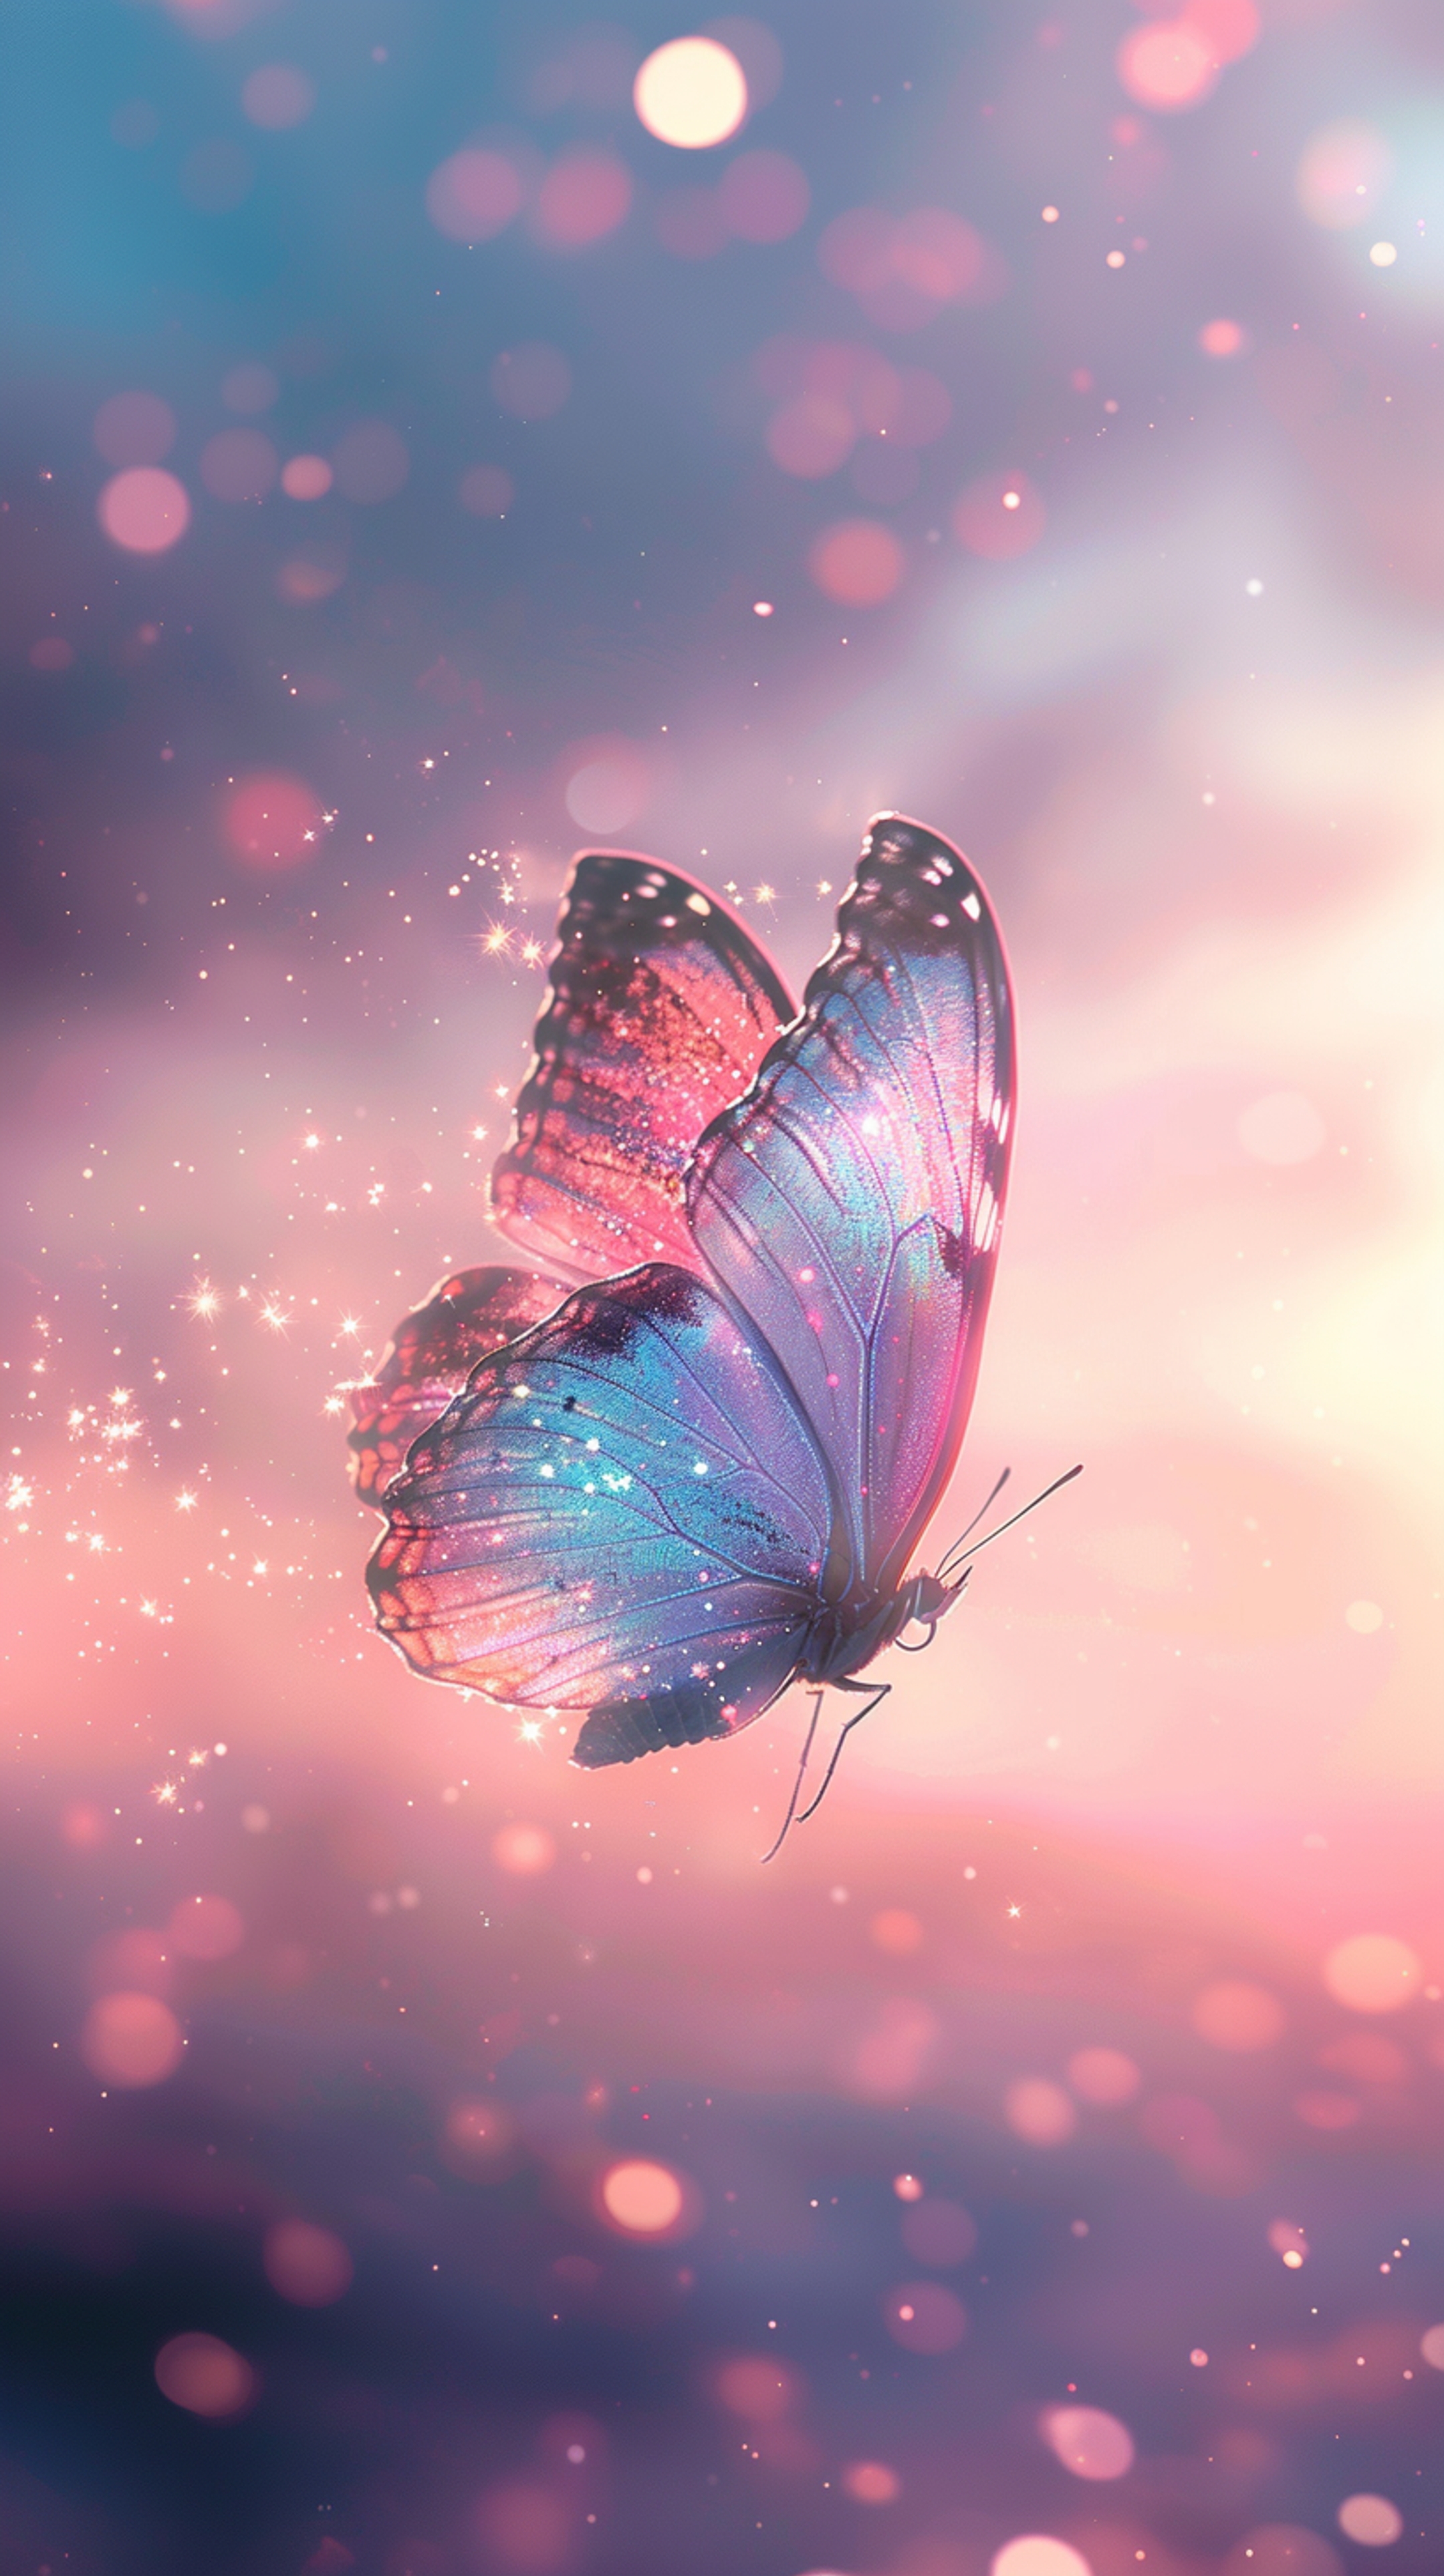 Magical Sparkling Butterfly in Dreamy Pink Sky Ფონი[1278b2409cd84640a5d9]